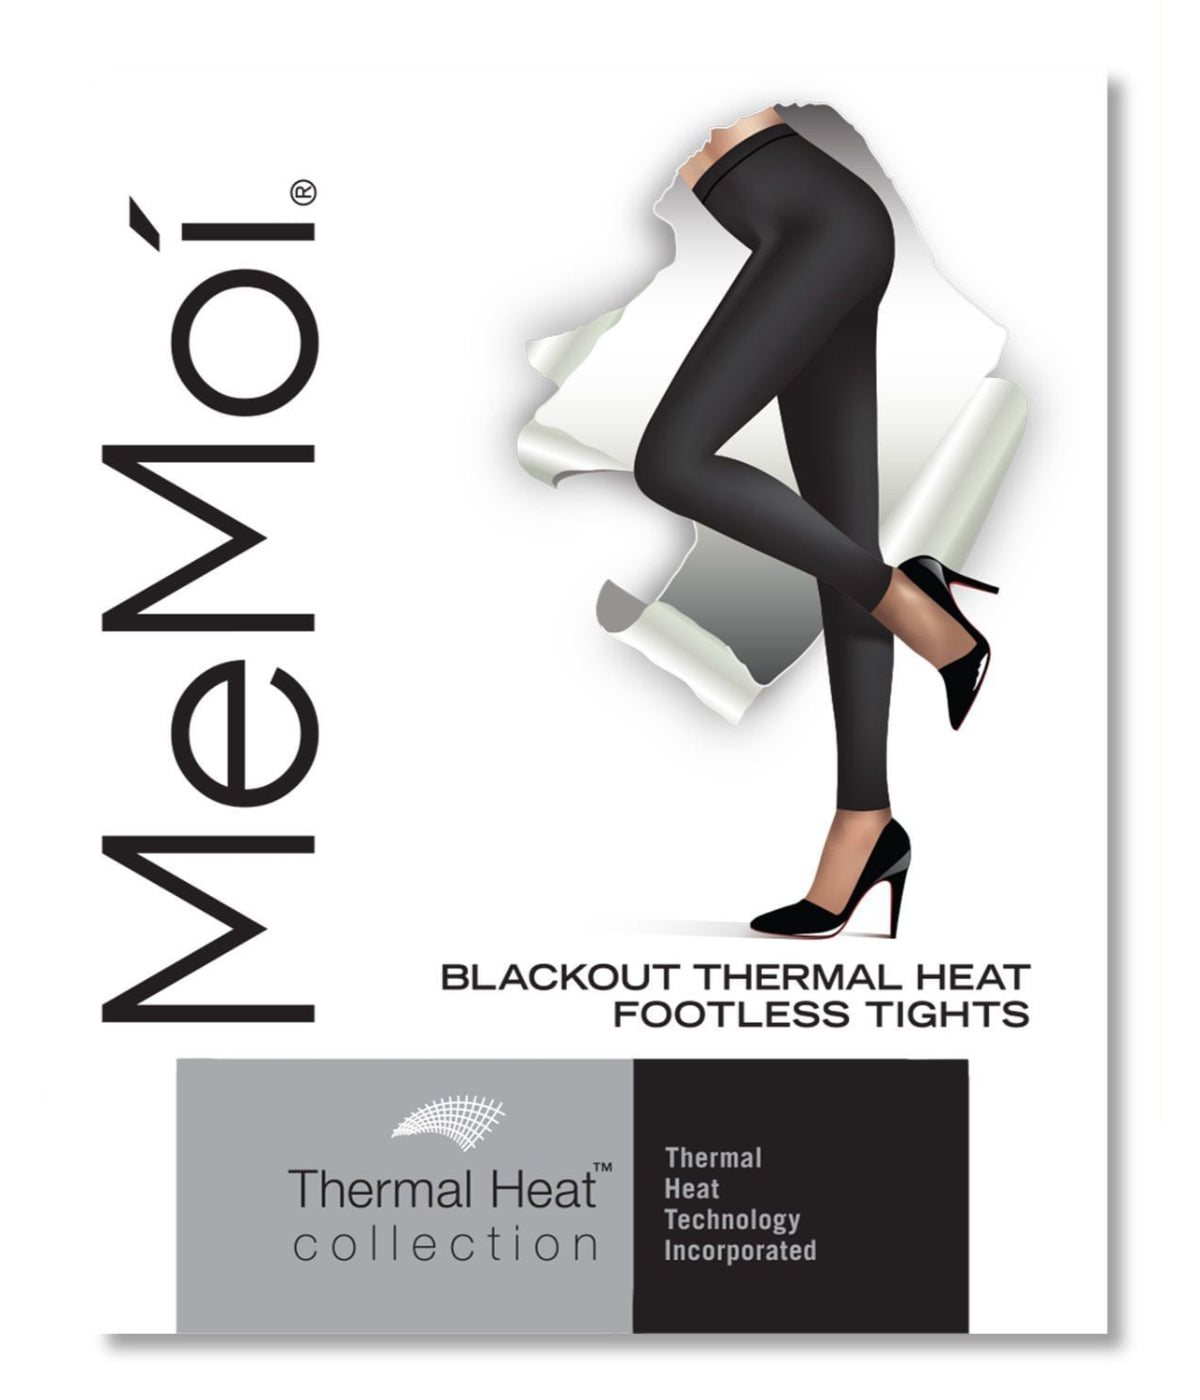 Blackout Thermal Heat Footless Tights Black